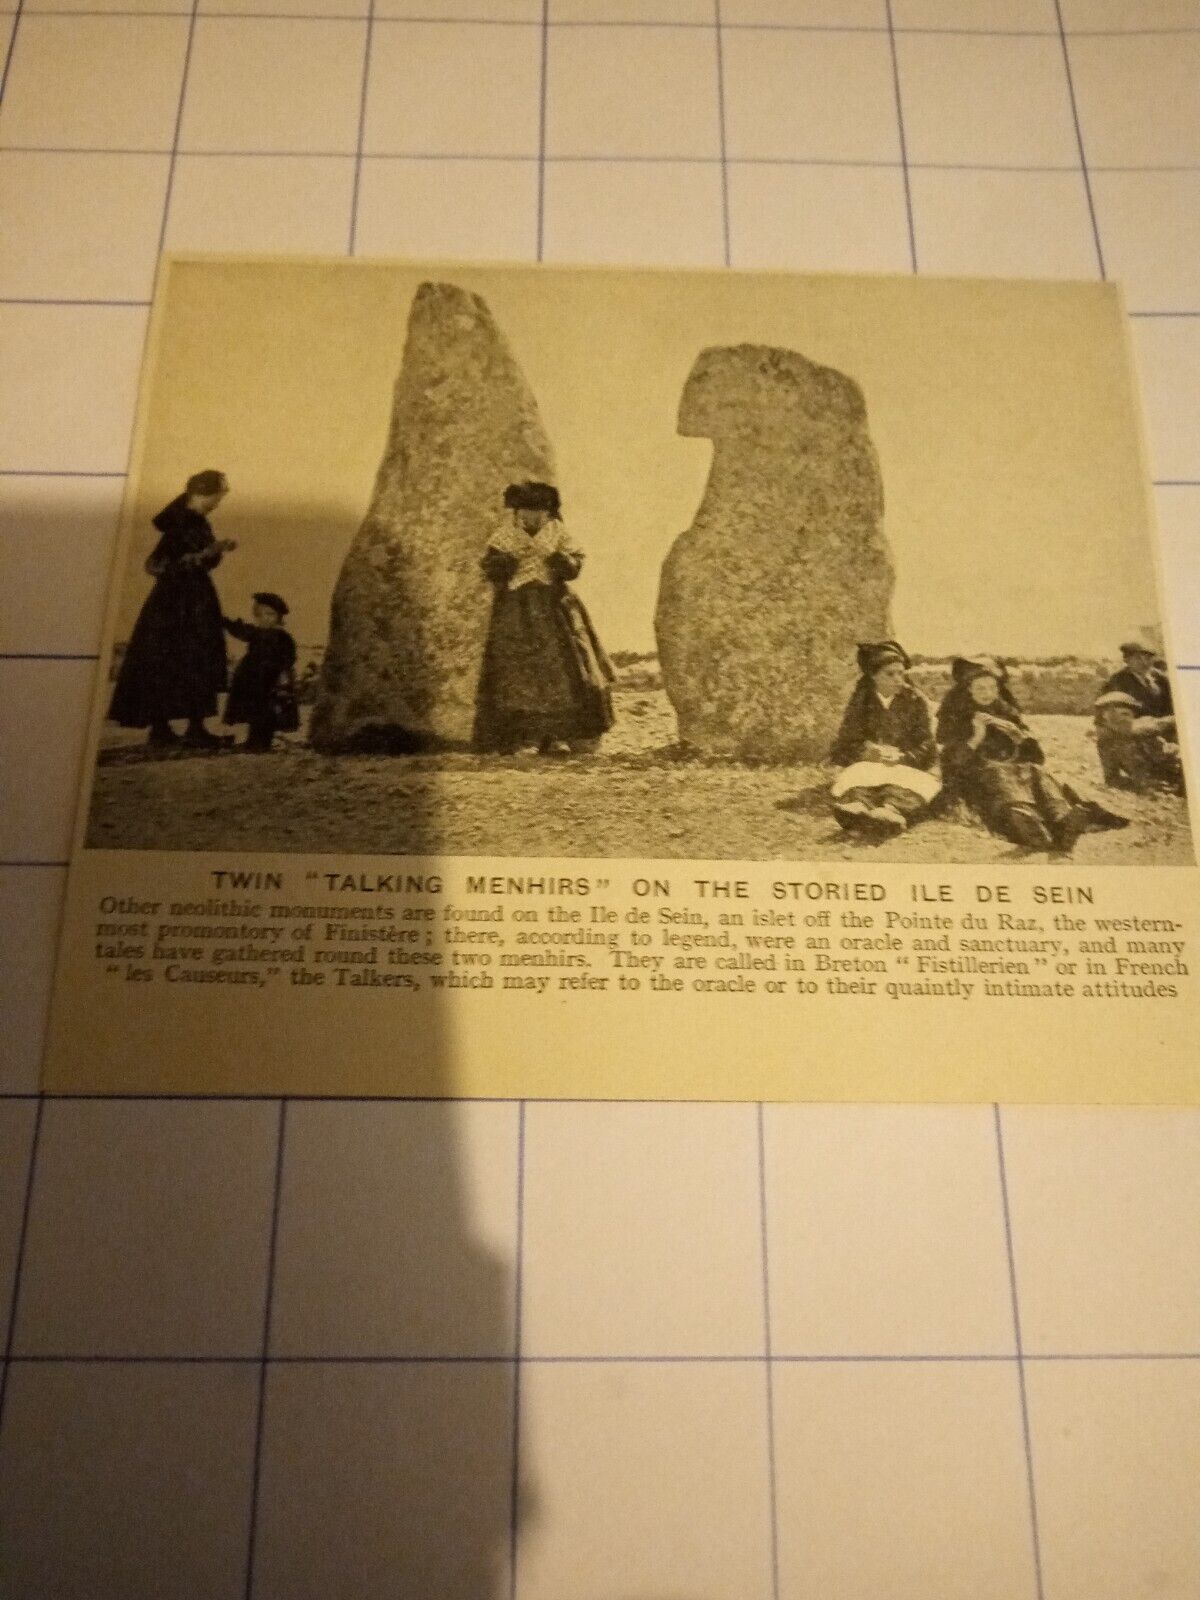 Twin talking menhirs on the storied Ile de sein c 1926